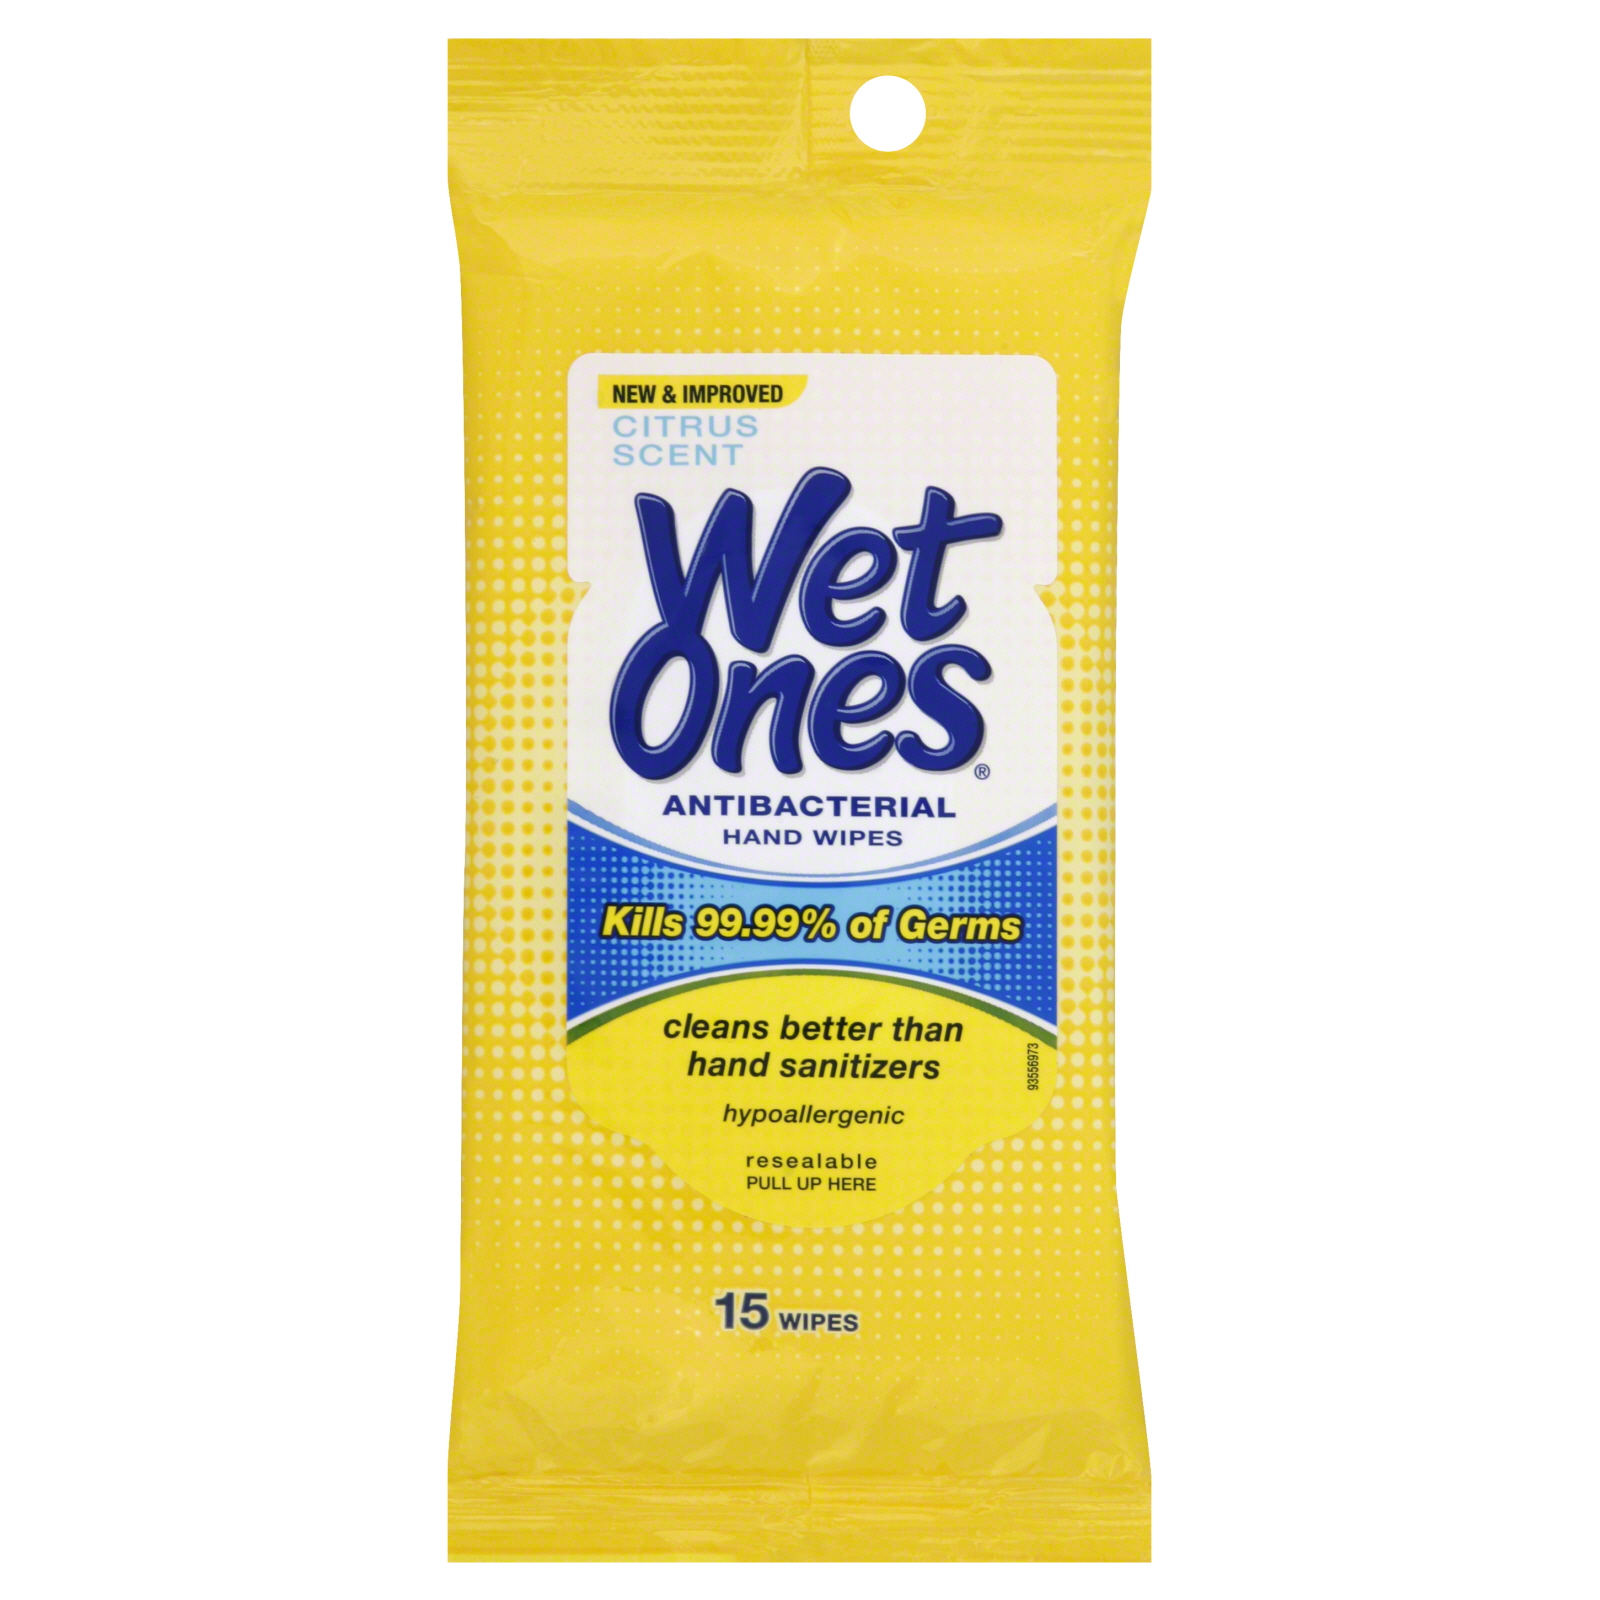 Wet Ones Wipes, Hands & Face, Antibacterial, Citrus Scent, Travel Pack - 15 wipes